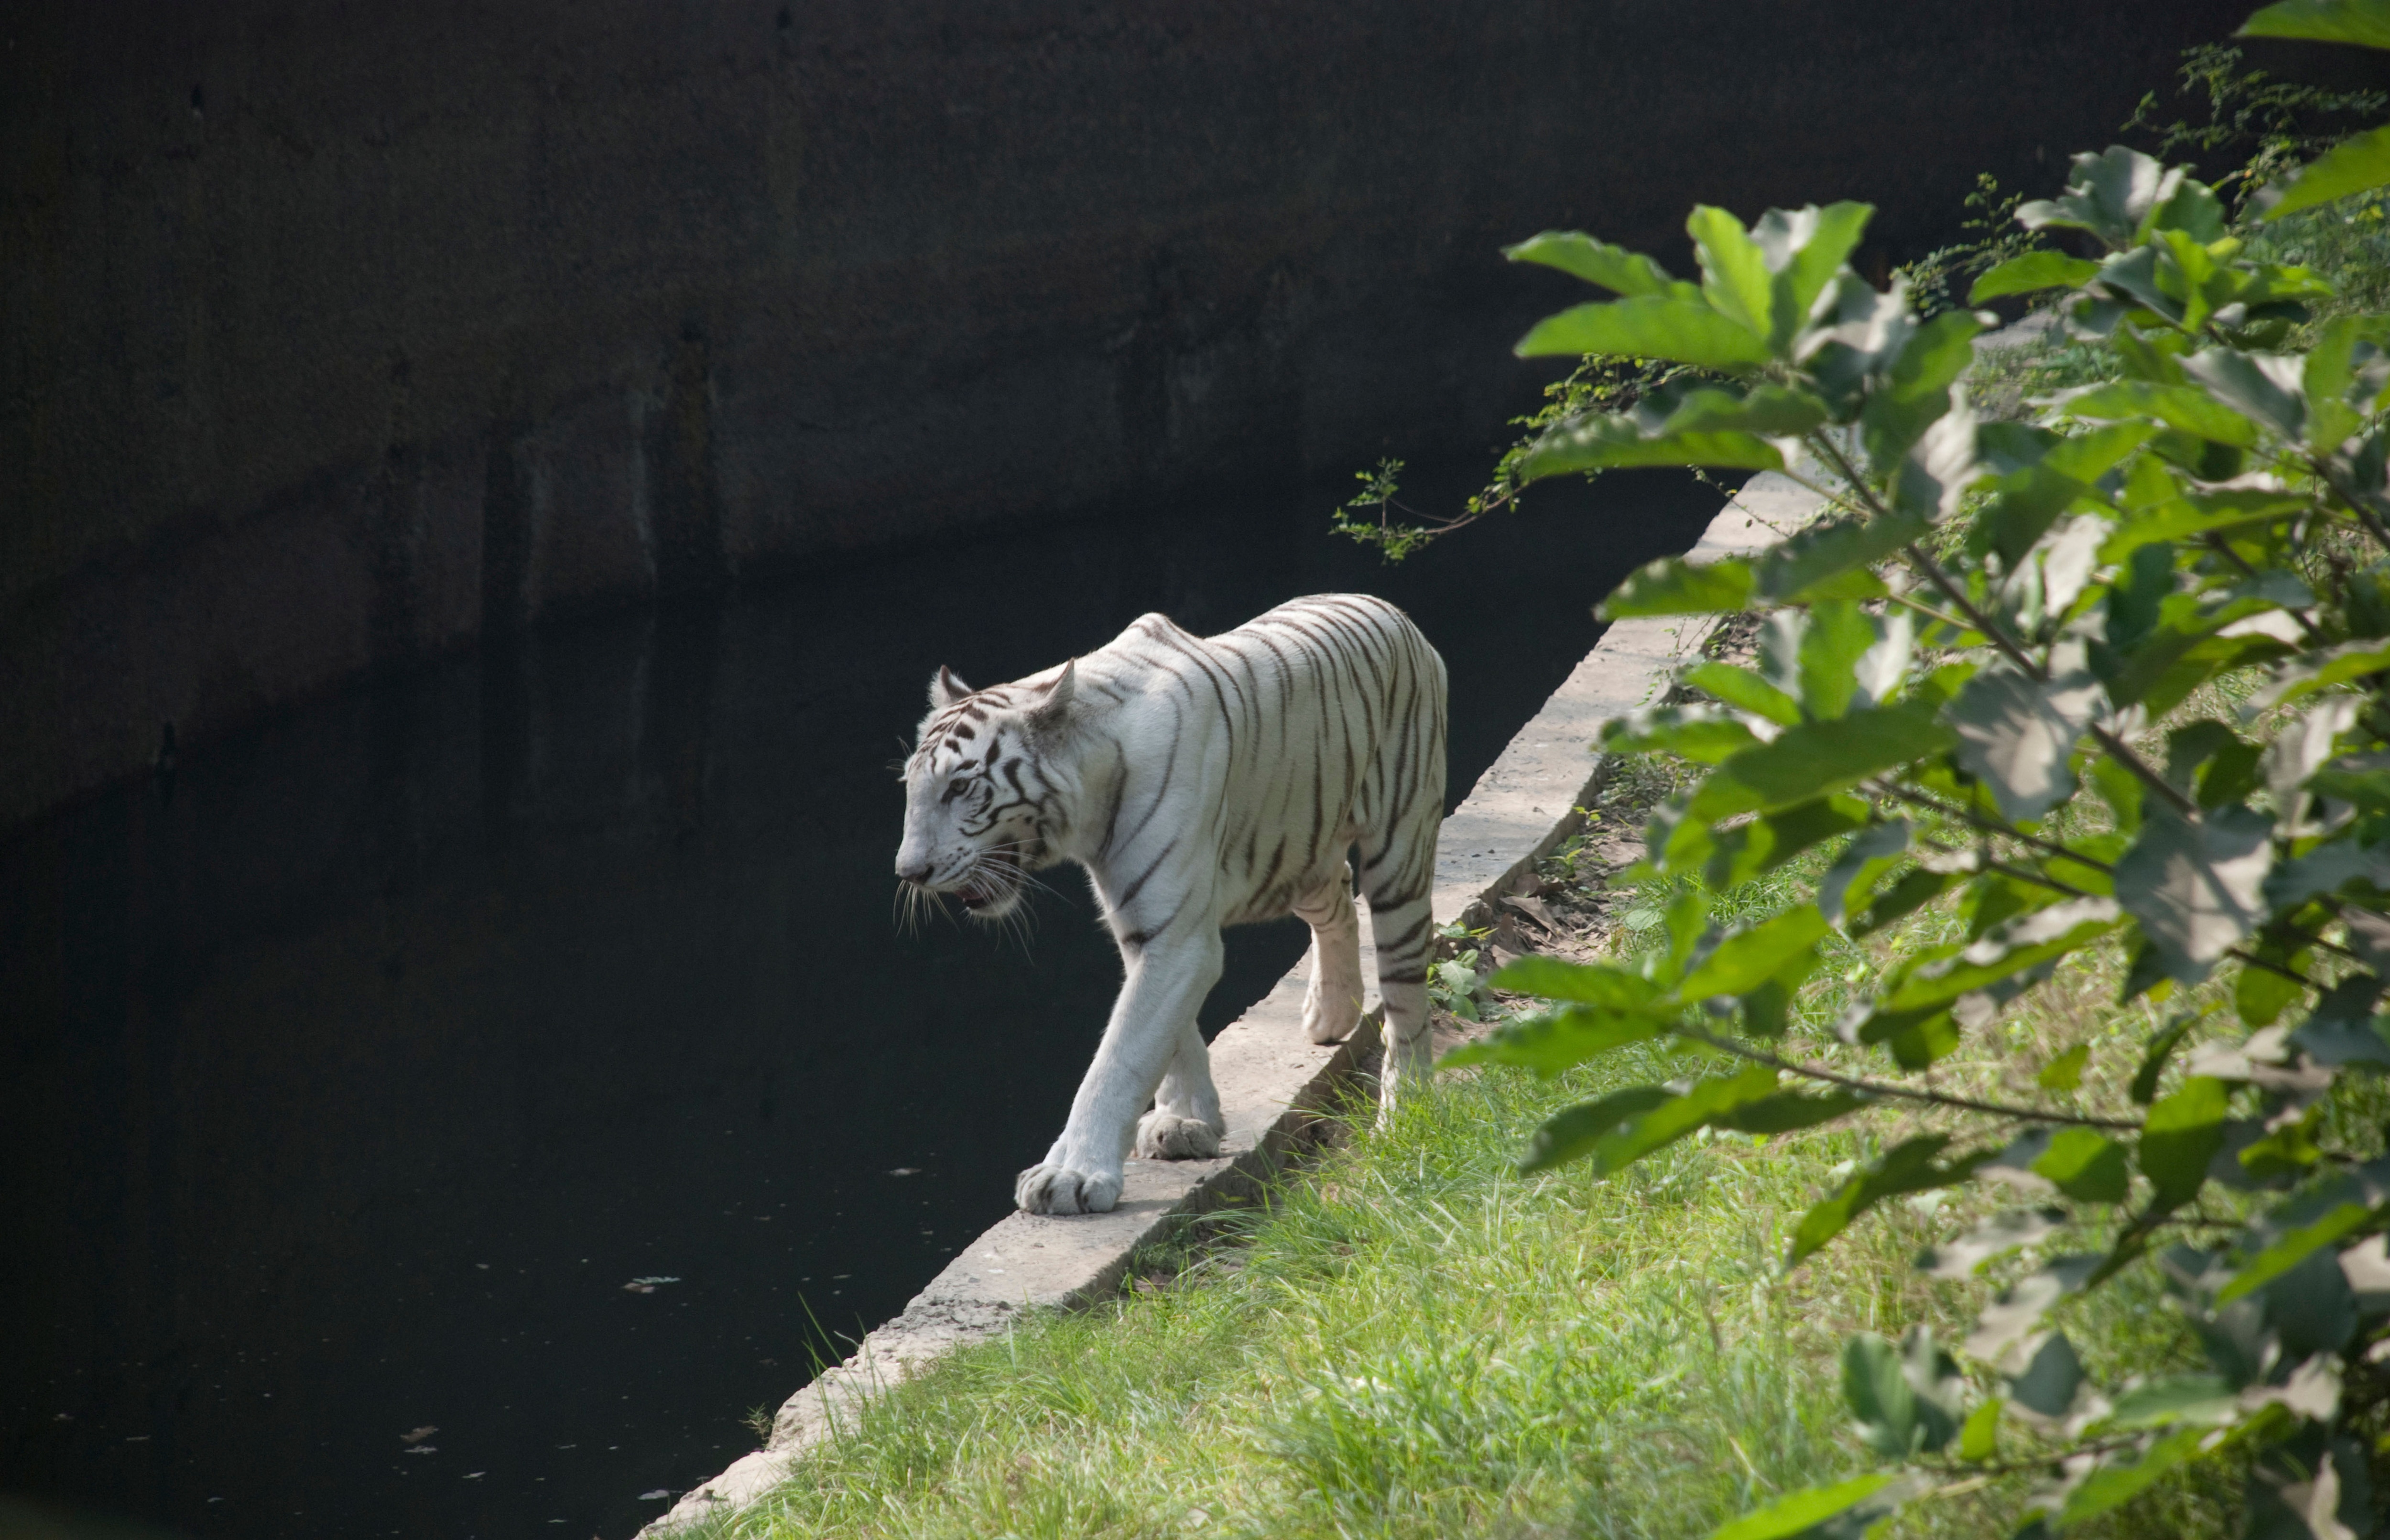 Alipore Zoological Gardens - One of the Top Attractions in Kolkata, India -  